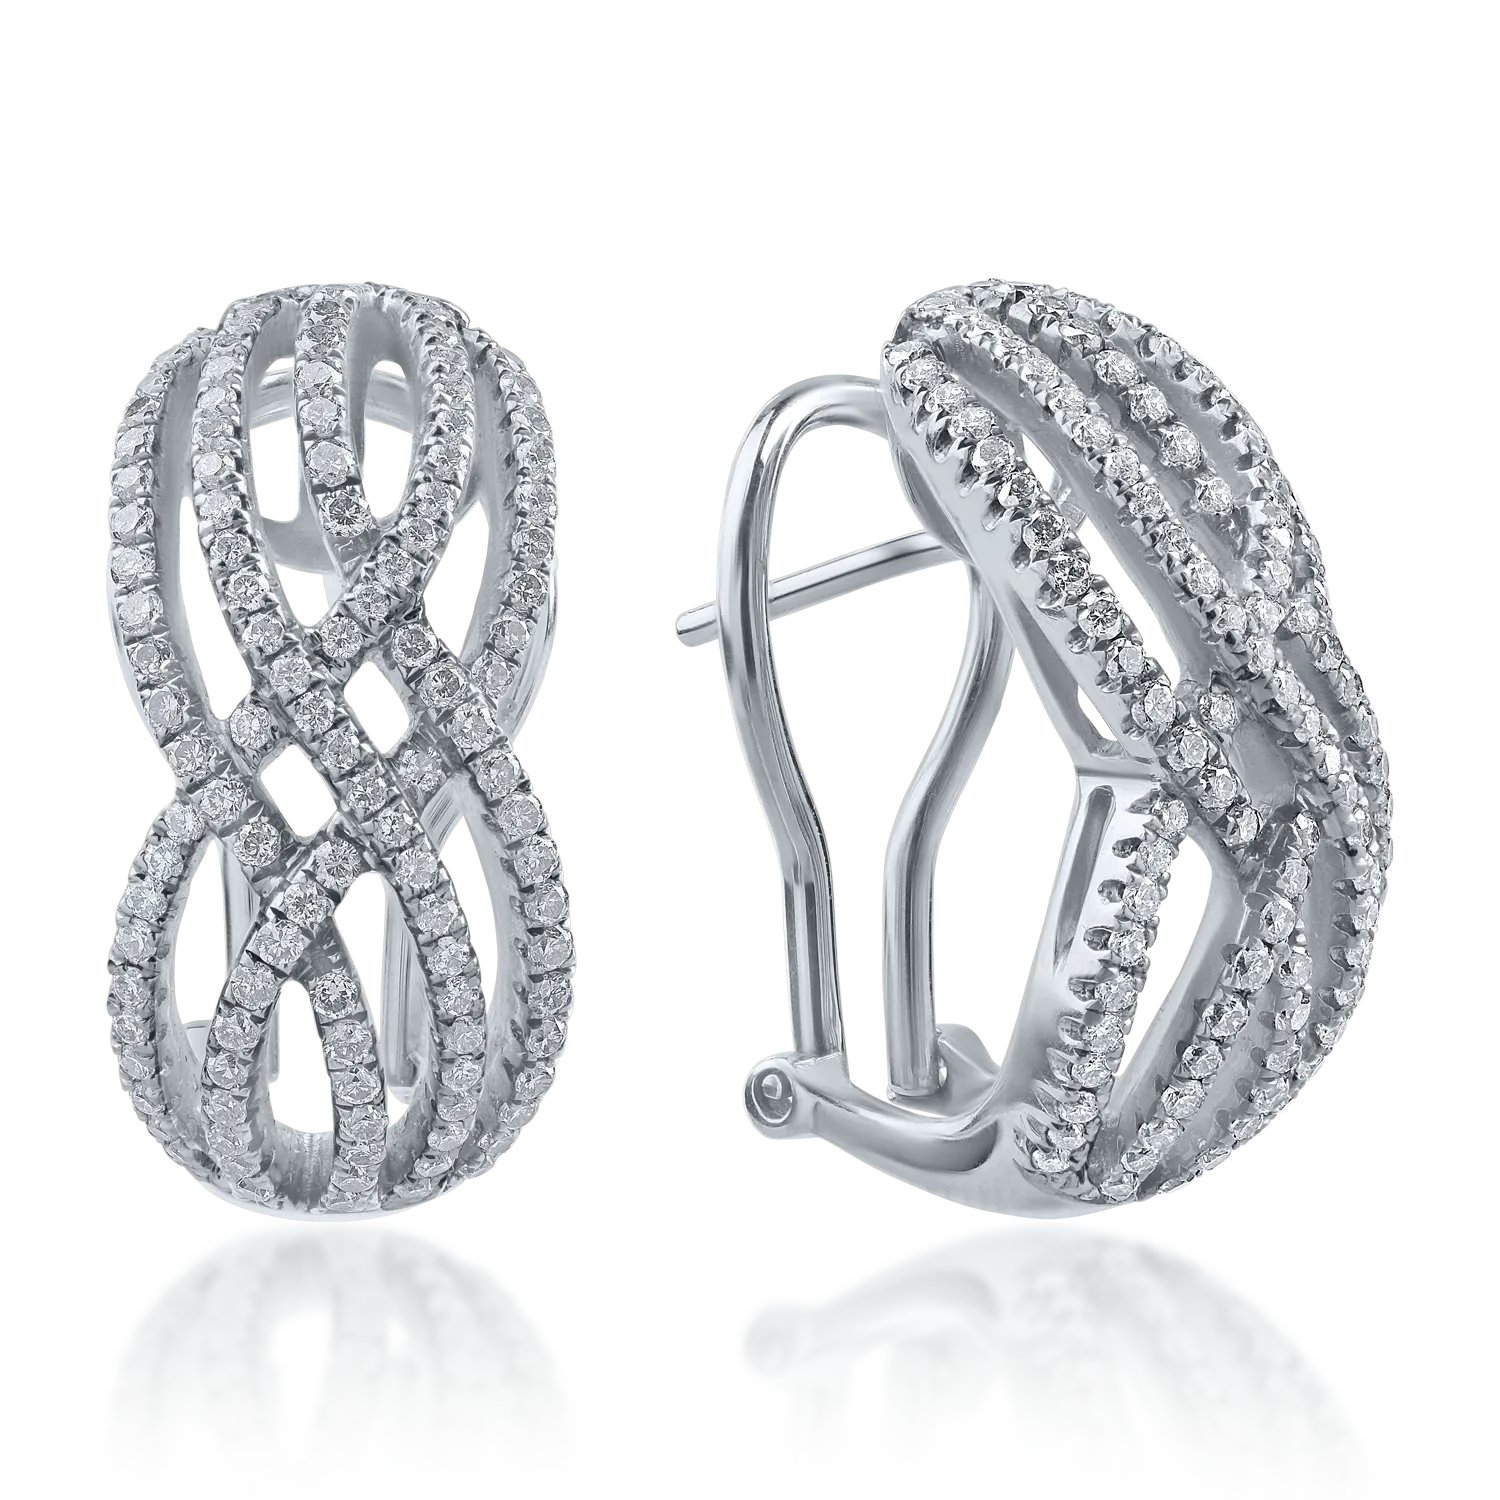 White gold earrings with 1.05ct diamonds